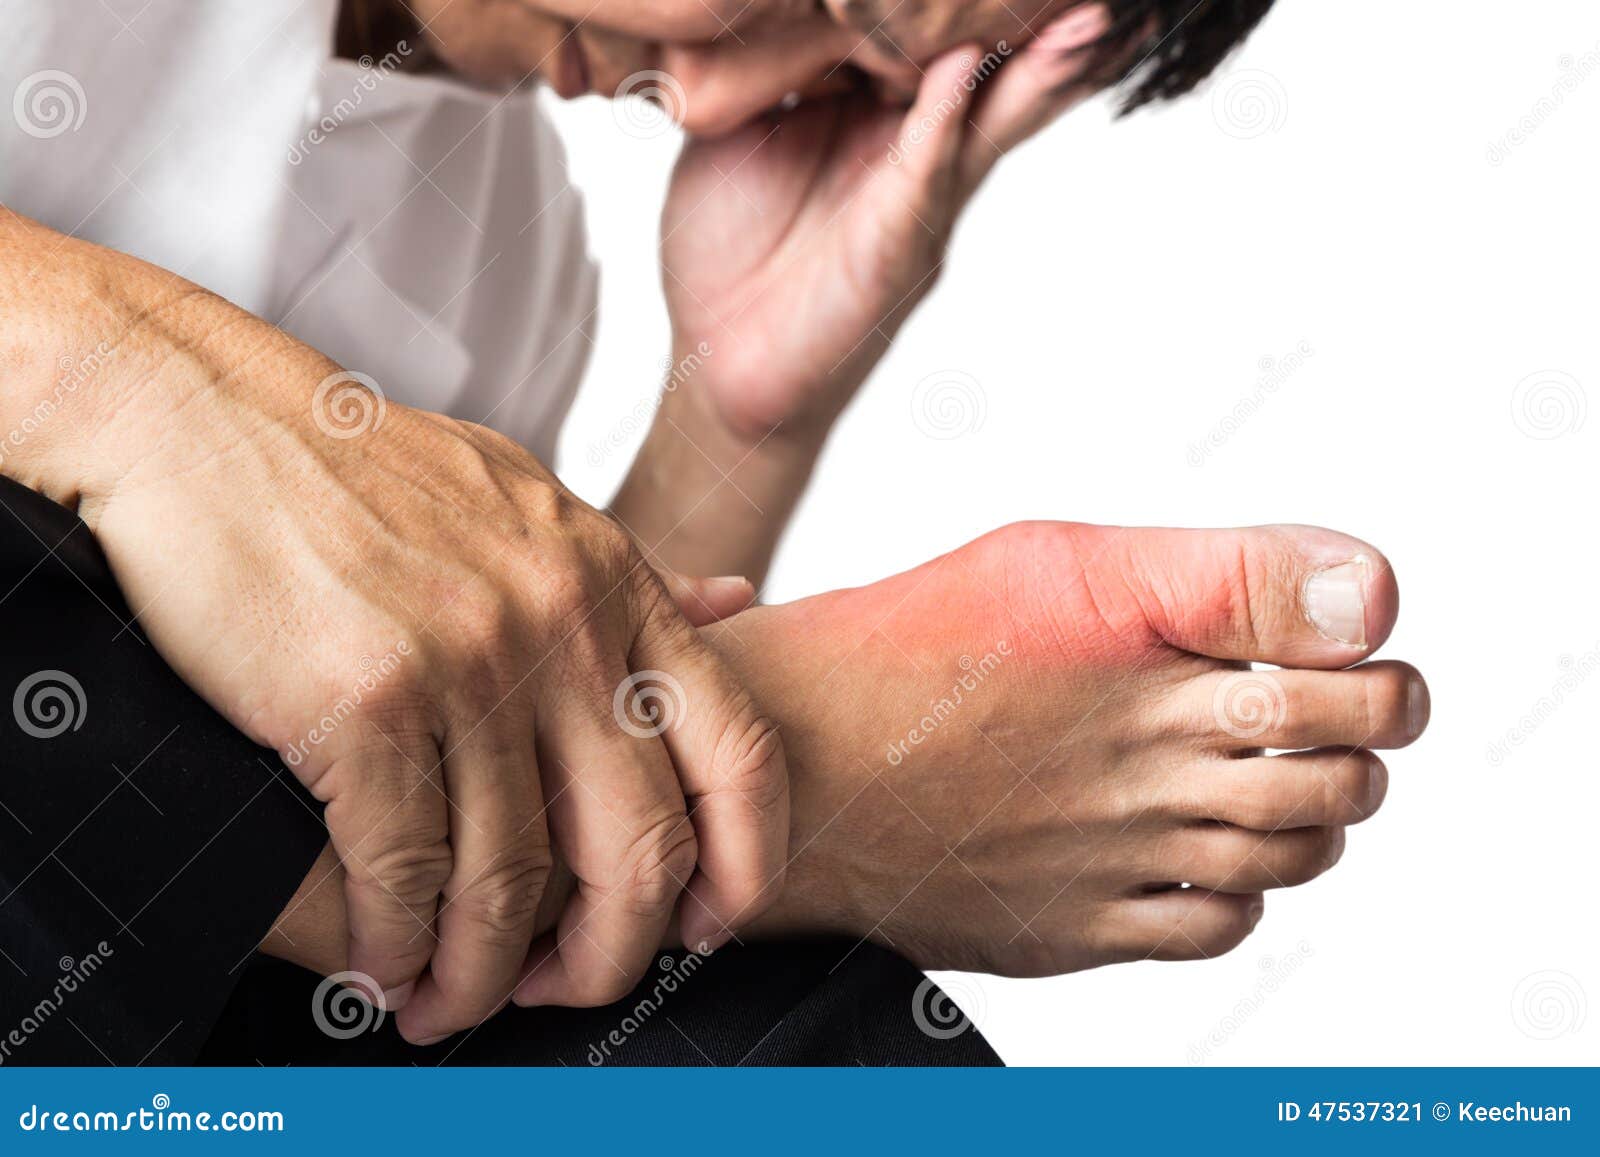 man with painful and inflamed gout on his foot, around the big toe area